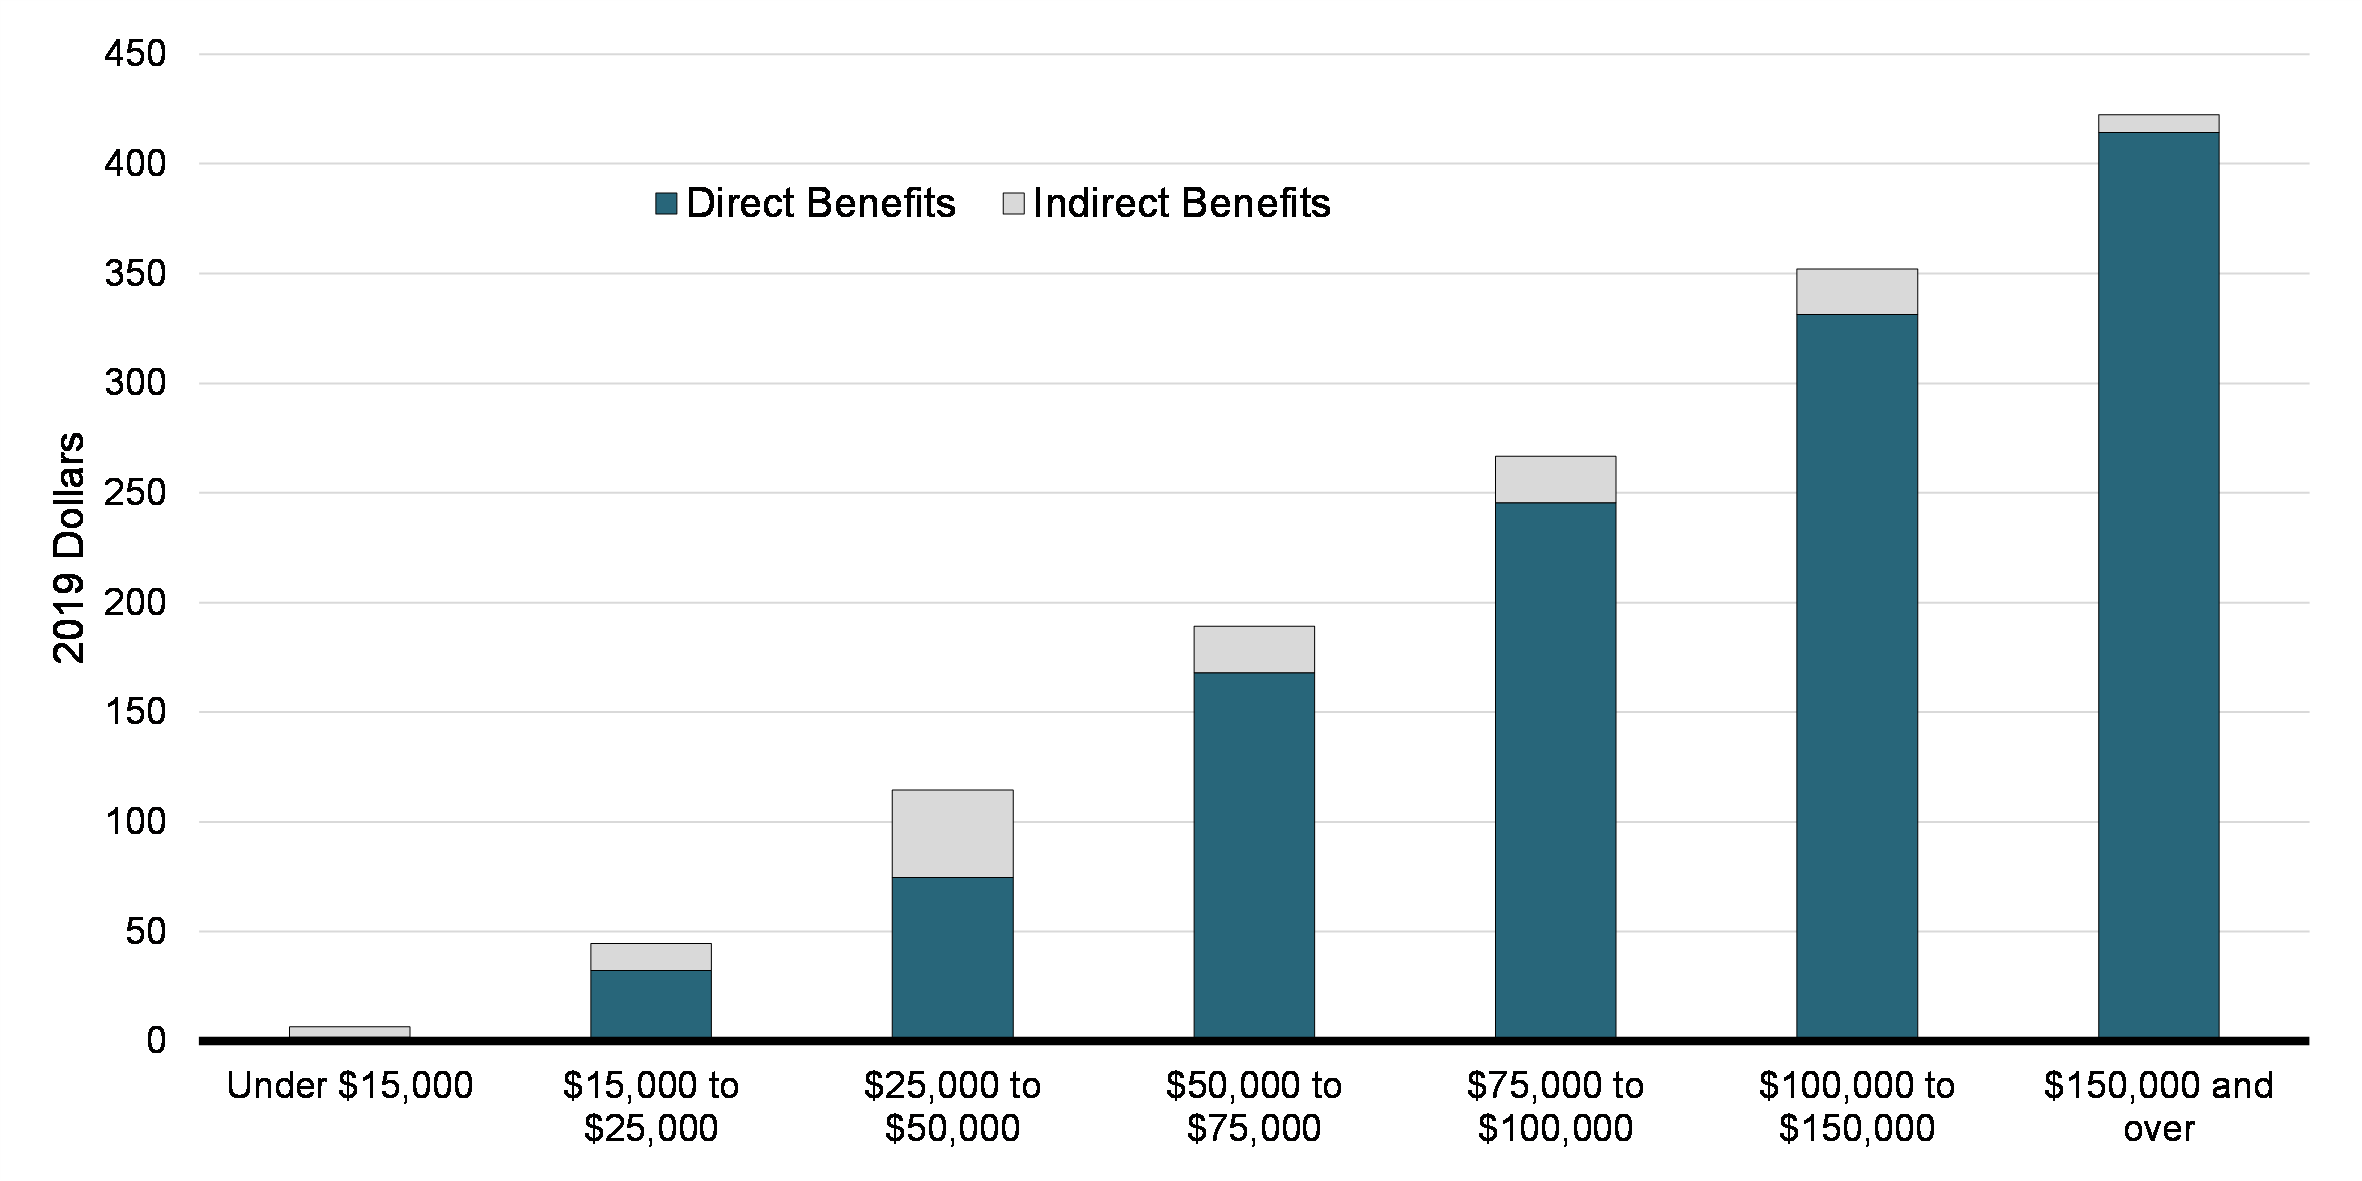  Chart 20: Direct and Indirect Benefits of UPD Deduction, by Income Group (2018), in 2019 Dollars
